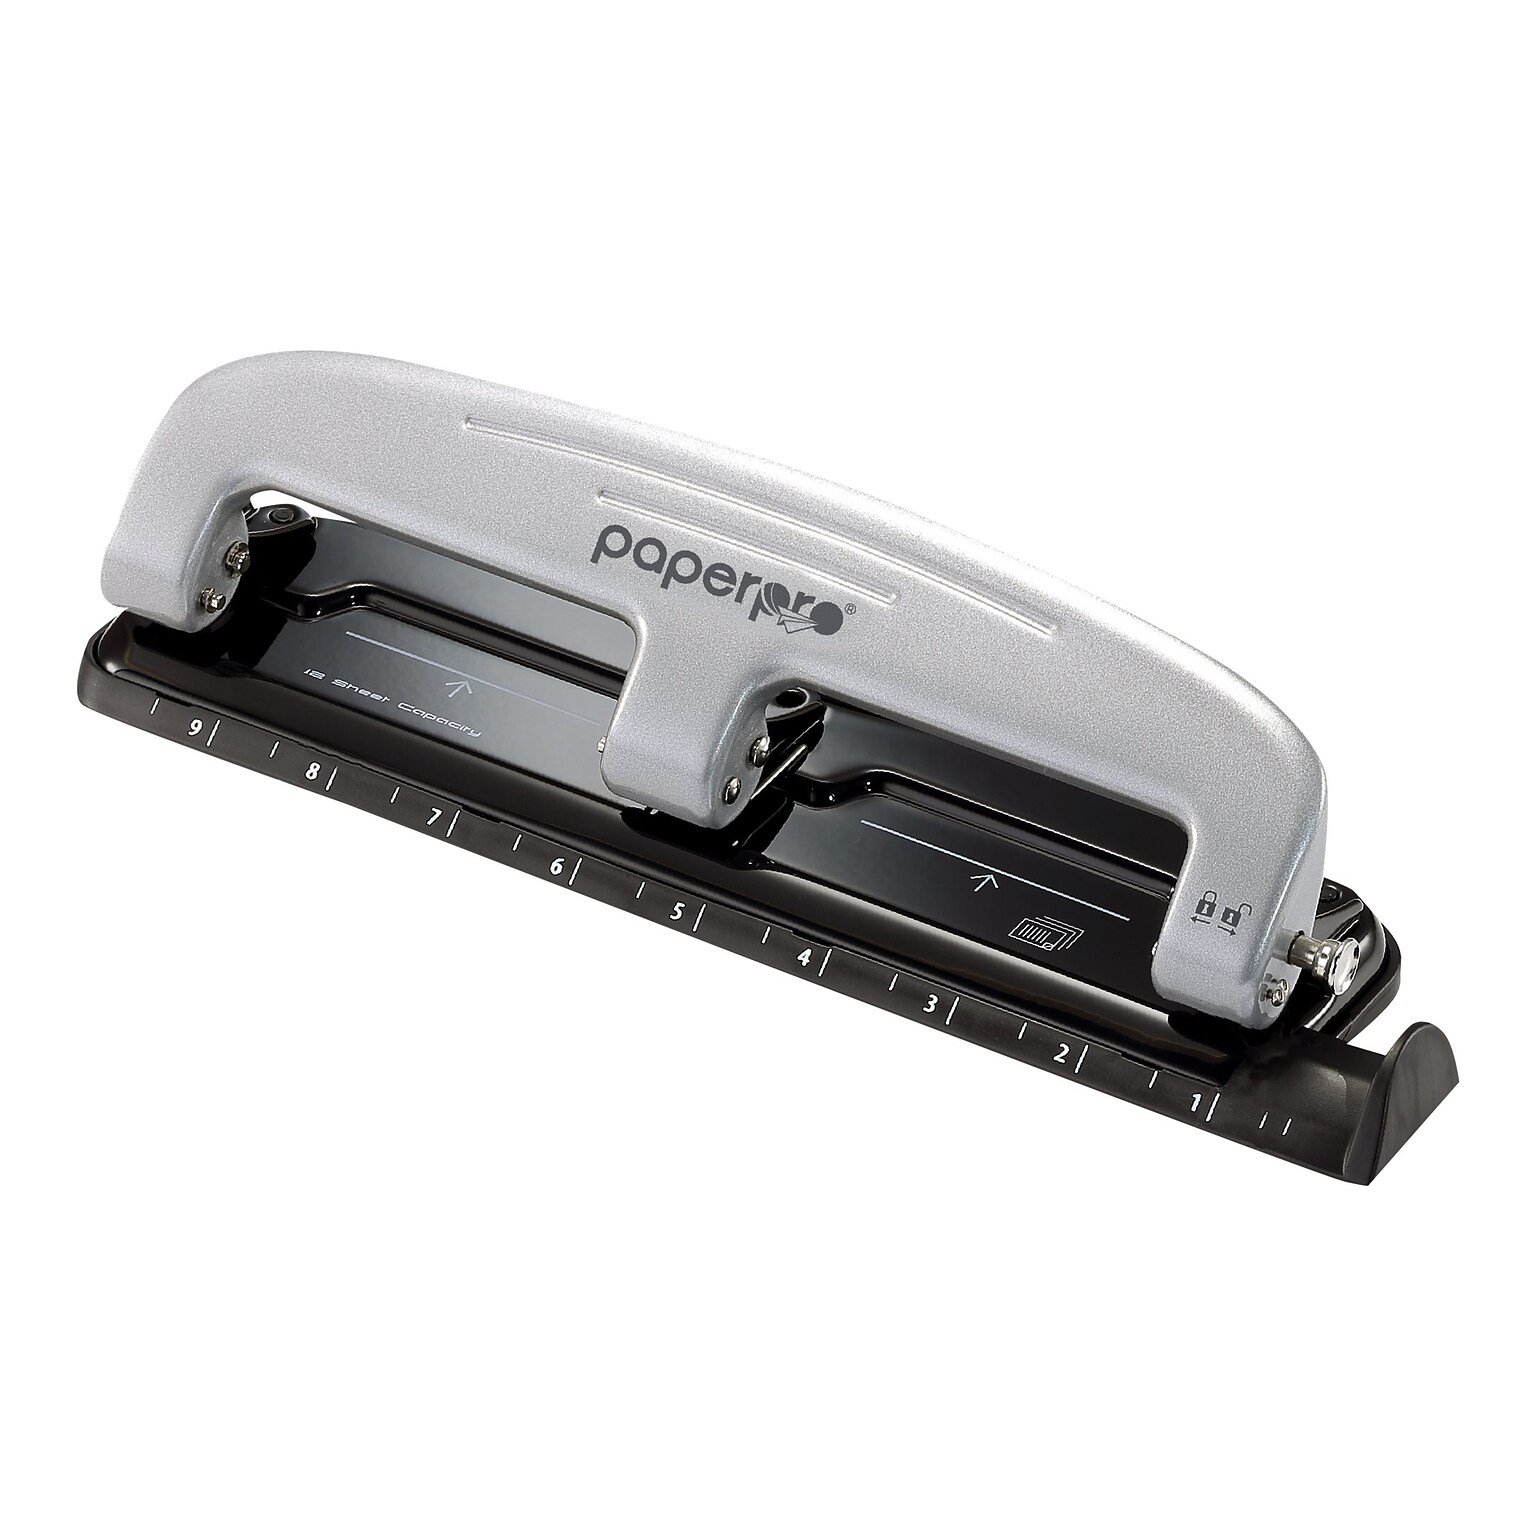 Bostitch EZ Squeeze™ Three-Hole Punch, 12 Sheet Capacity, Silver/Black (2101)